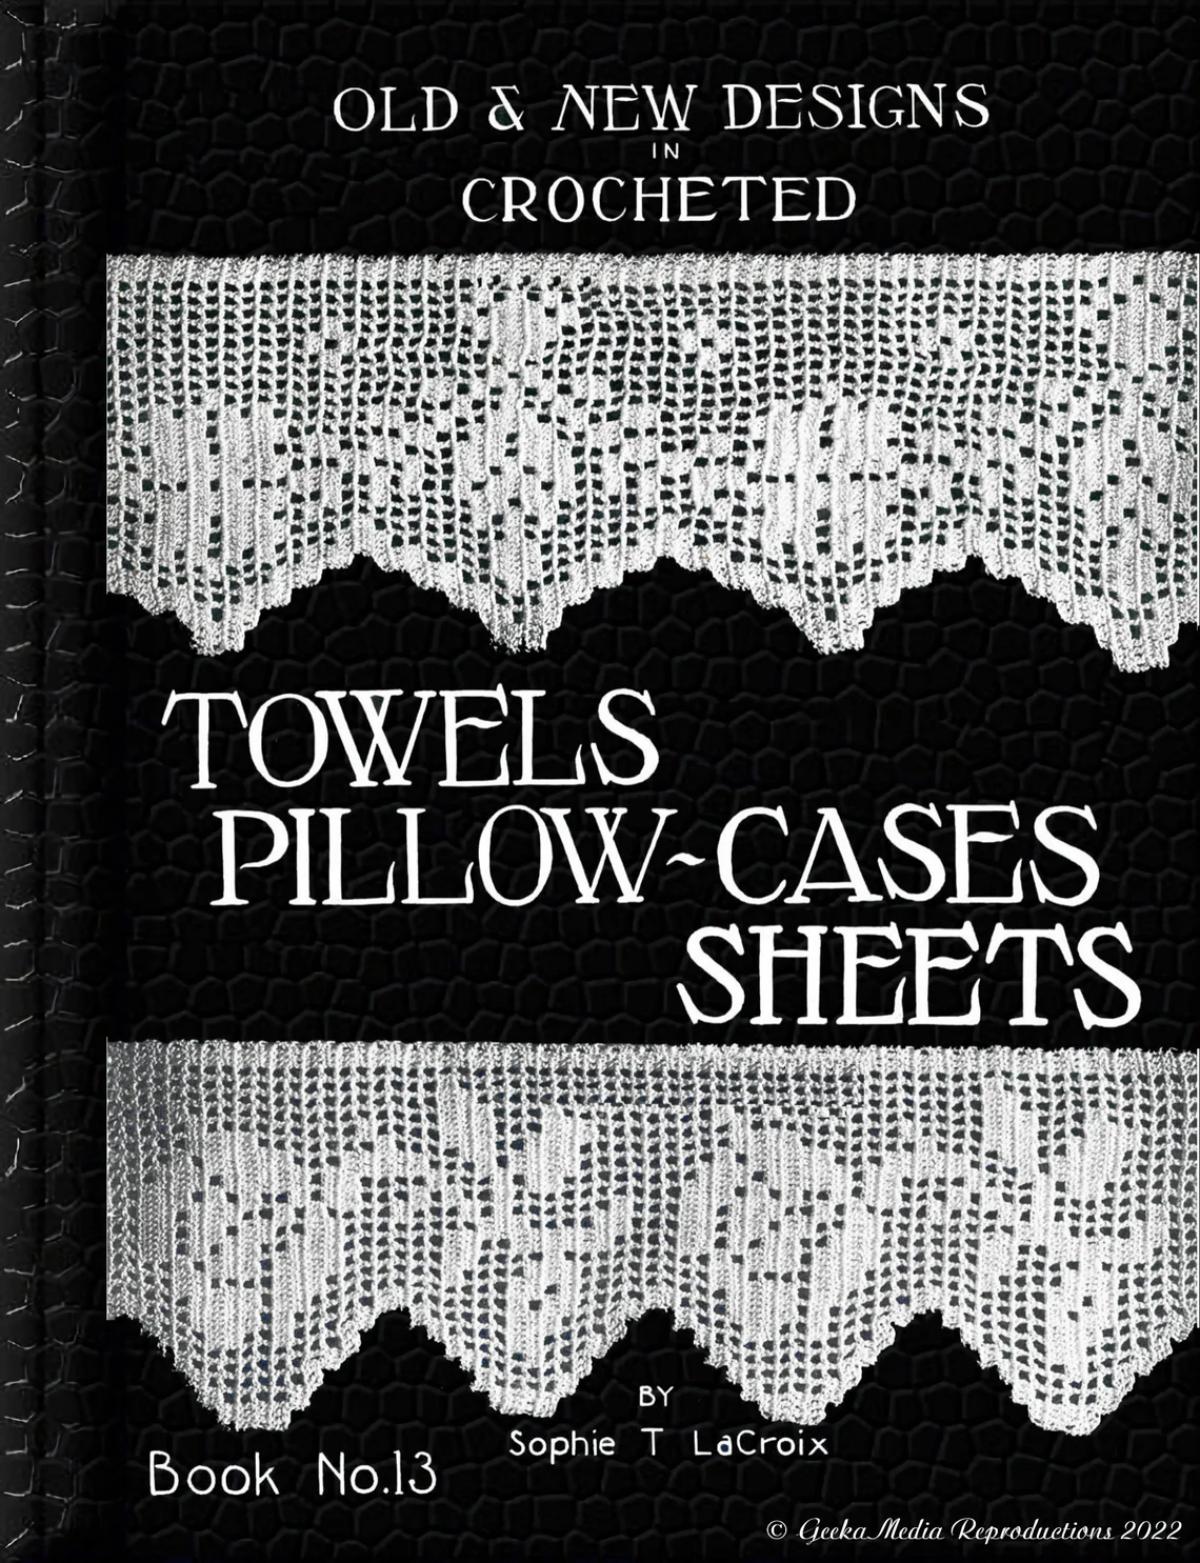 Vintage 1940s Crochet Patterns for Towels, Curtains, and Bed Linens